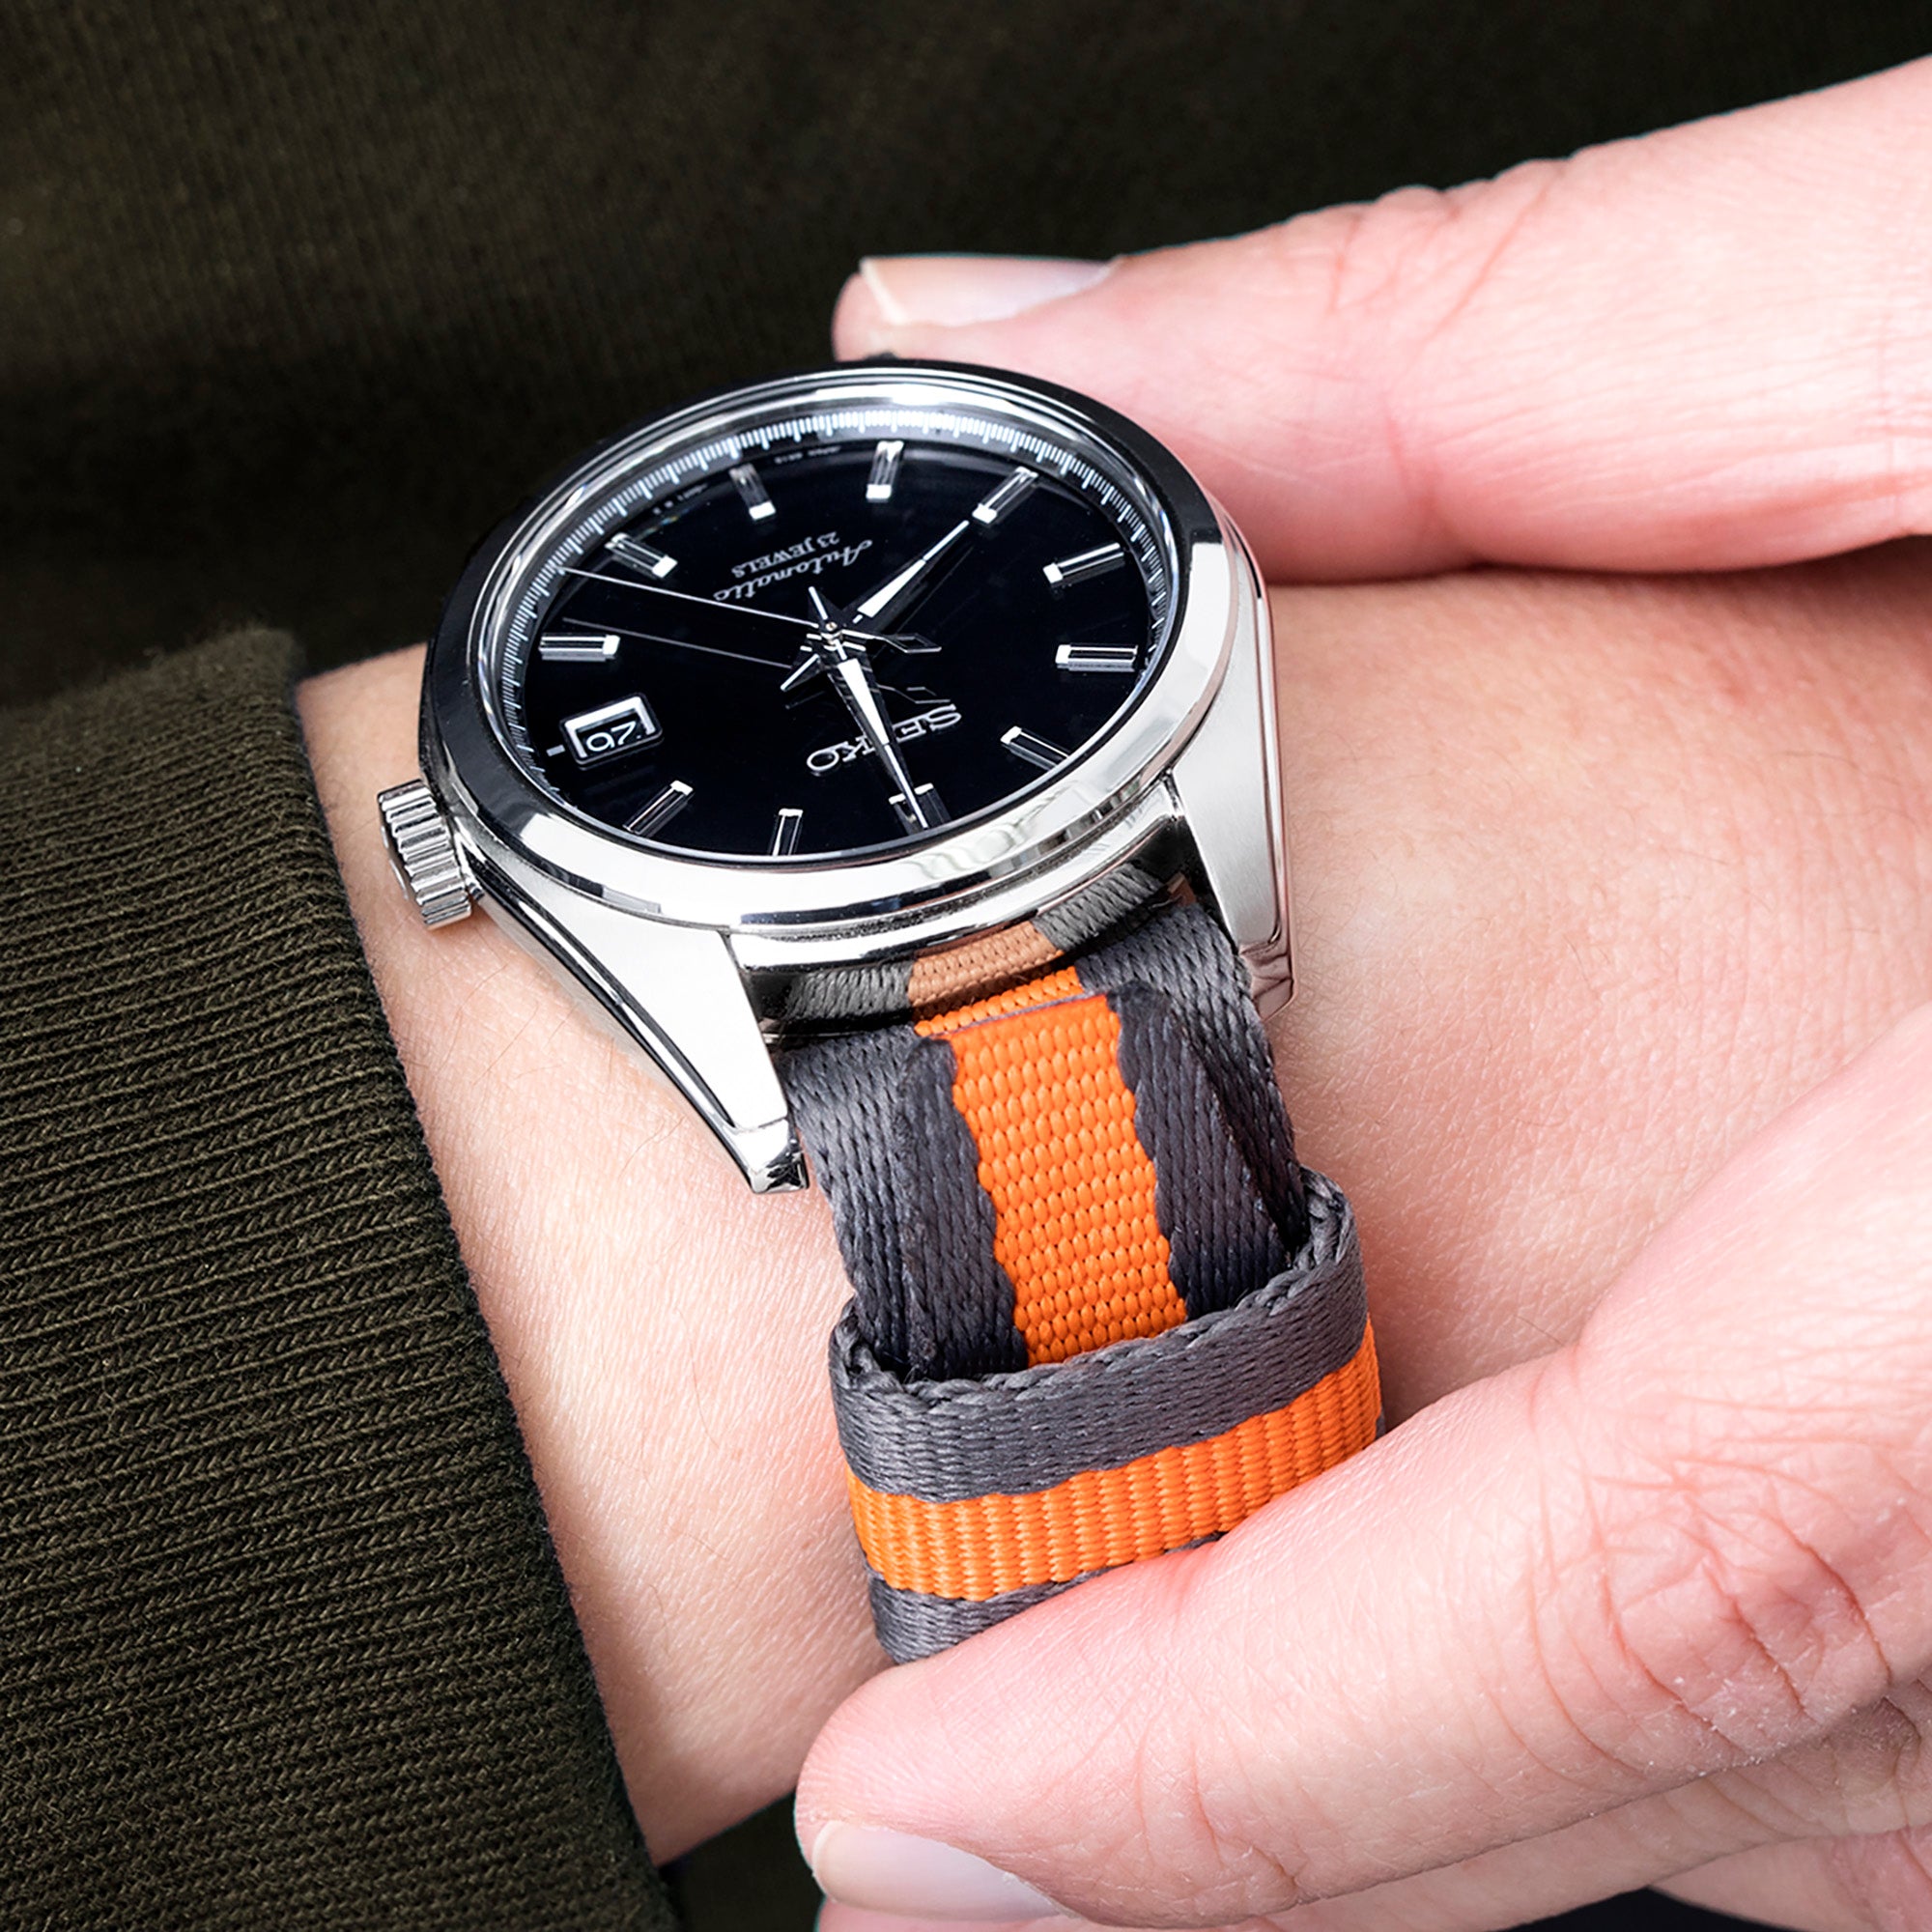 Seiko SARB03 Black Dial Watch with the eye-catching 20mm Grey and Orange MiLTAT RAF N7 Nato Watch Strap by Strapcode watch bands